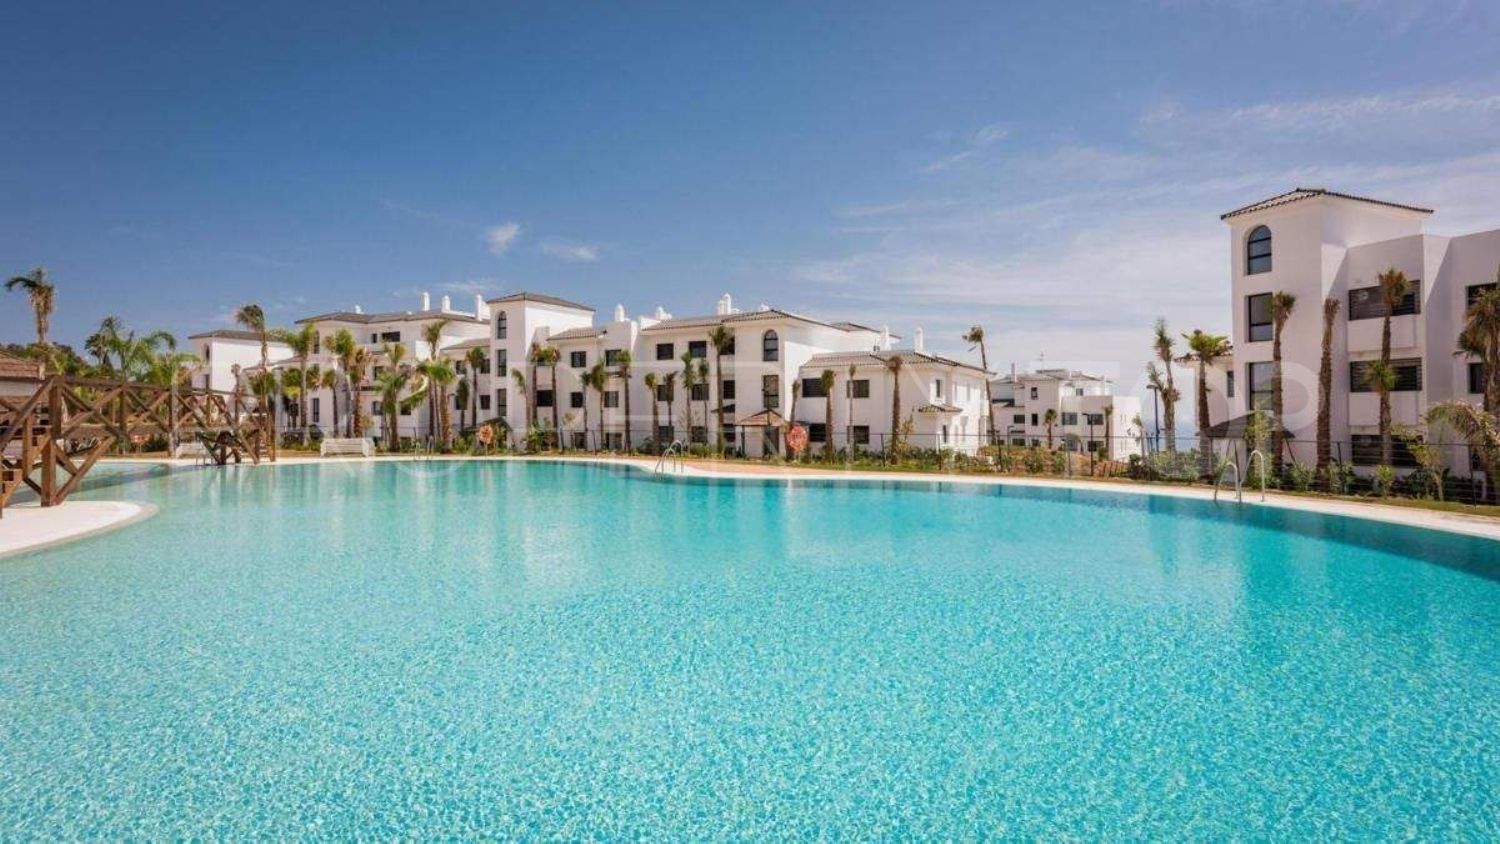 Apartment for sale in Los Reales - Sierra Estepona with 4 bedrooms